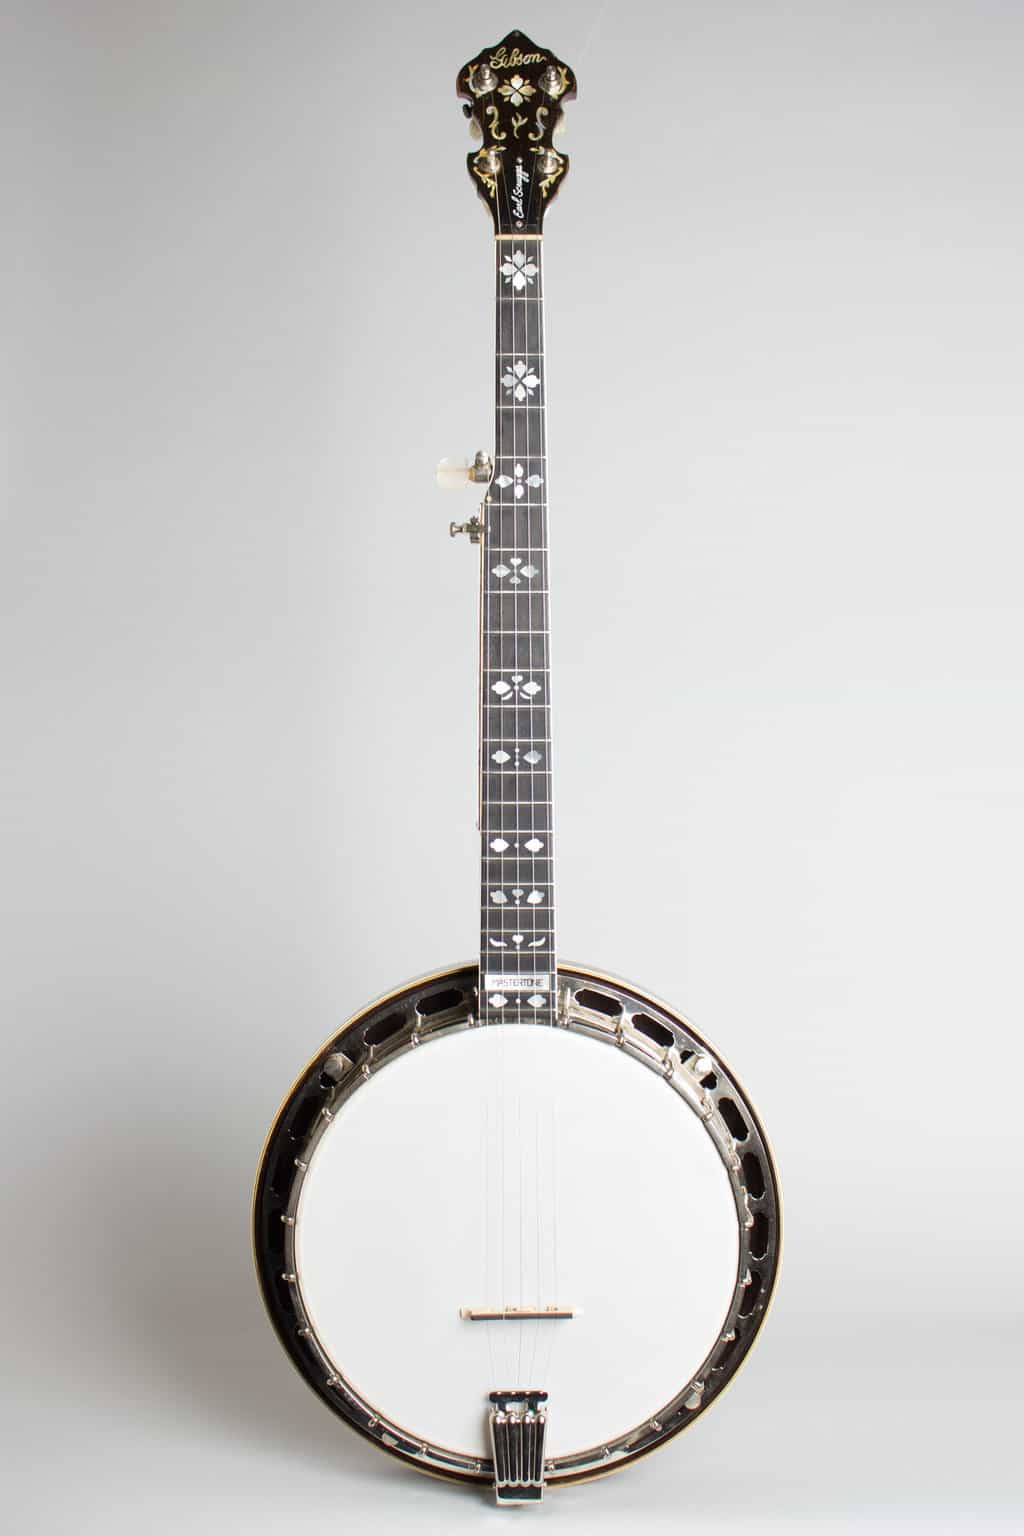 Banjo Accessories Used By Scruggs